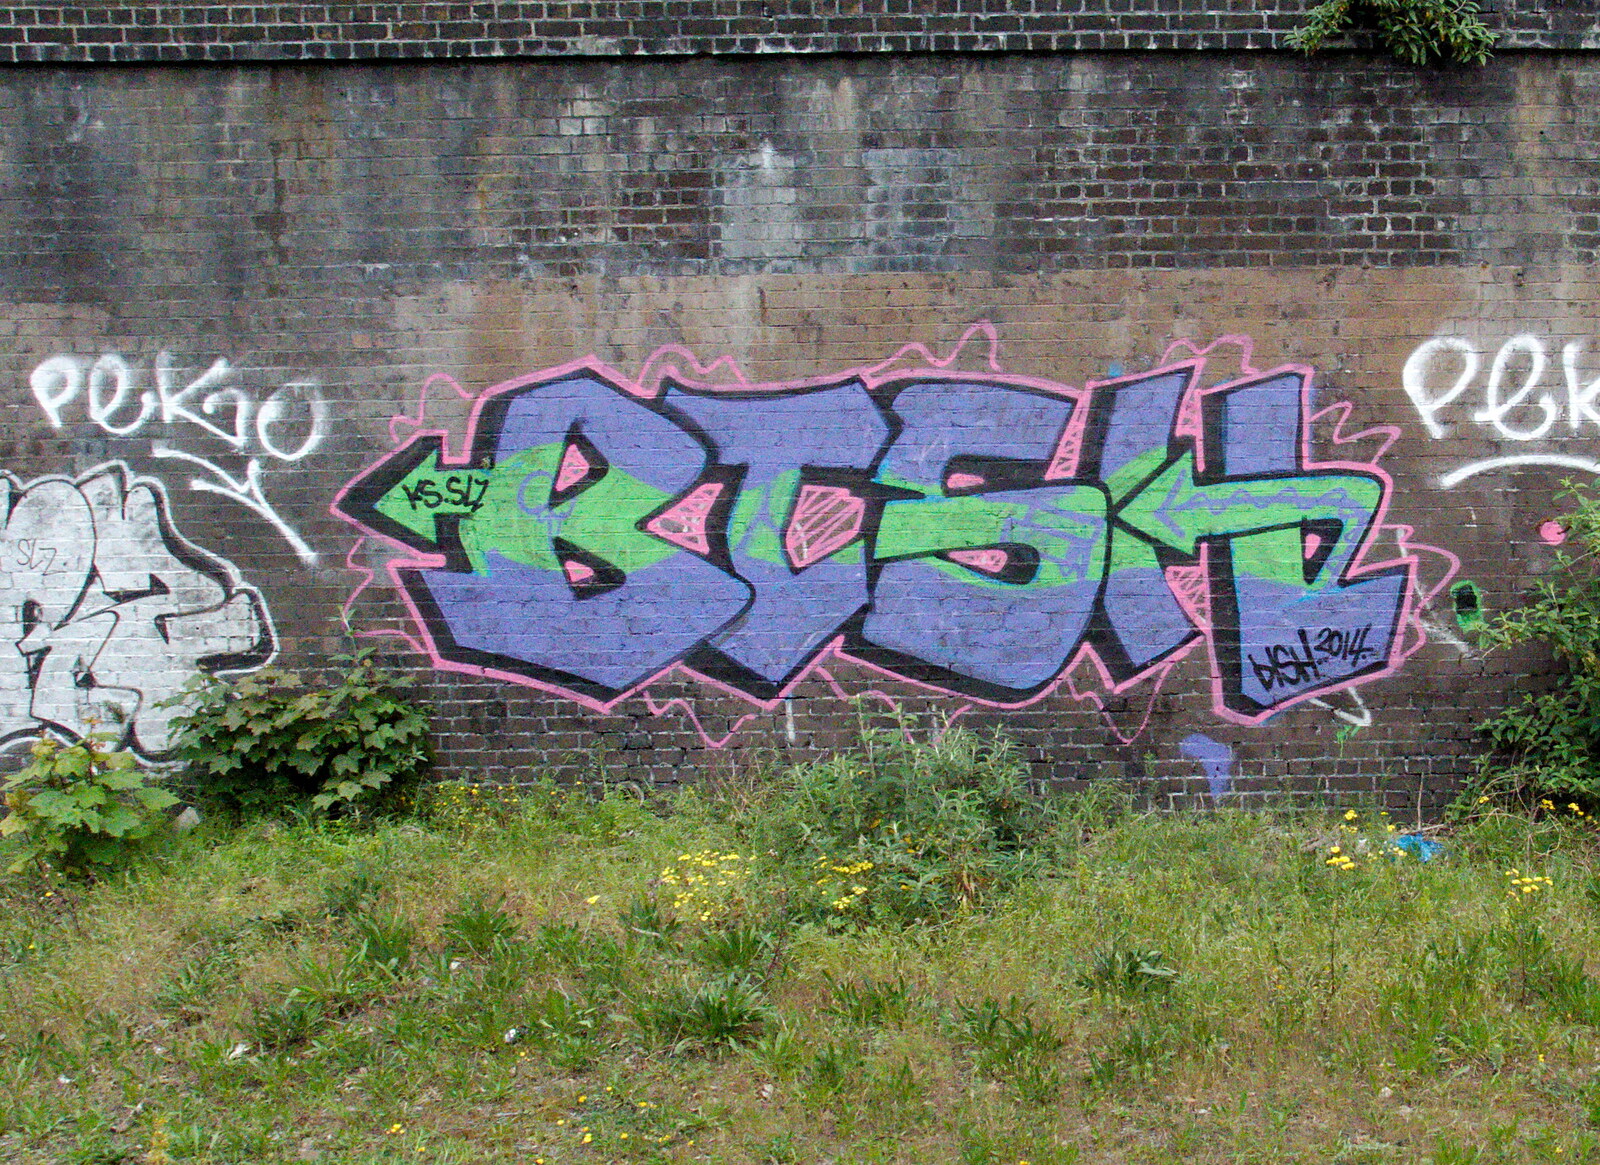 Another new tag: Bish from Brantham Dereliction, and a SwiftKey Photoshoot, Suffolk and Southwark - 29th April 2014